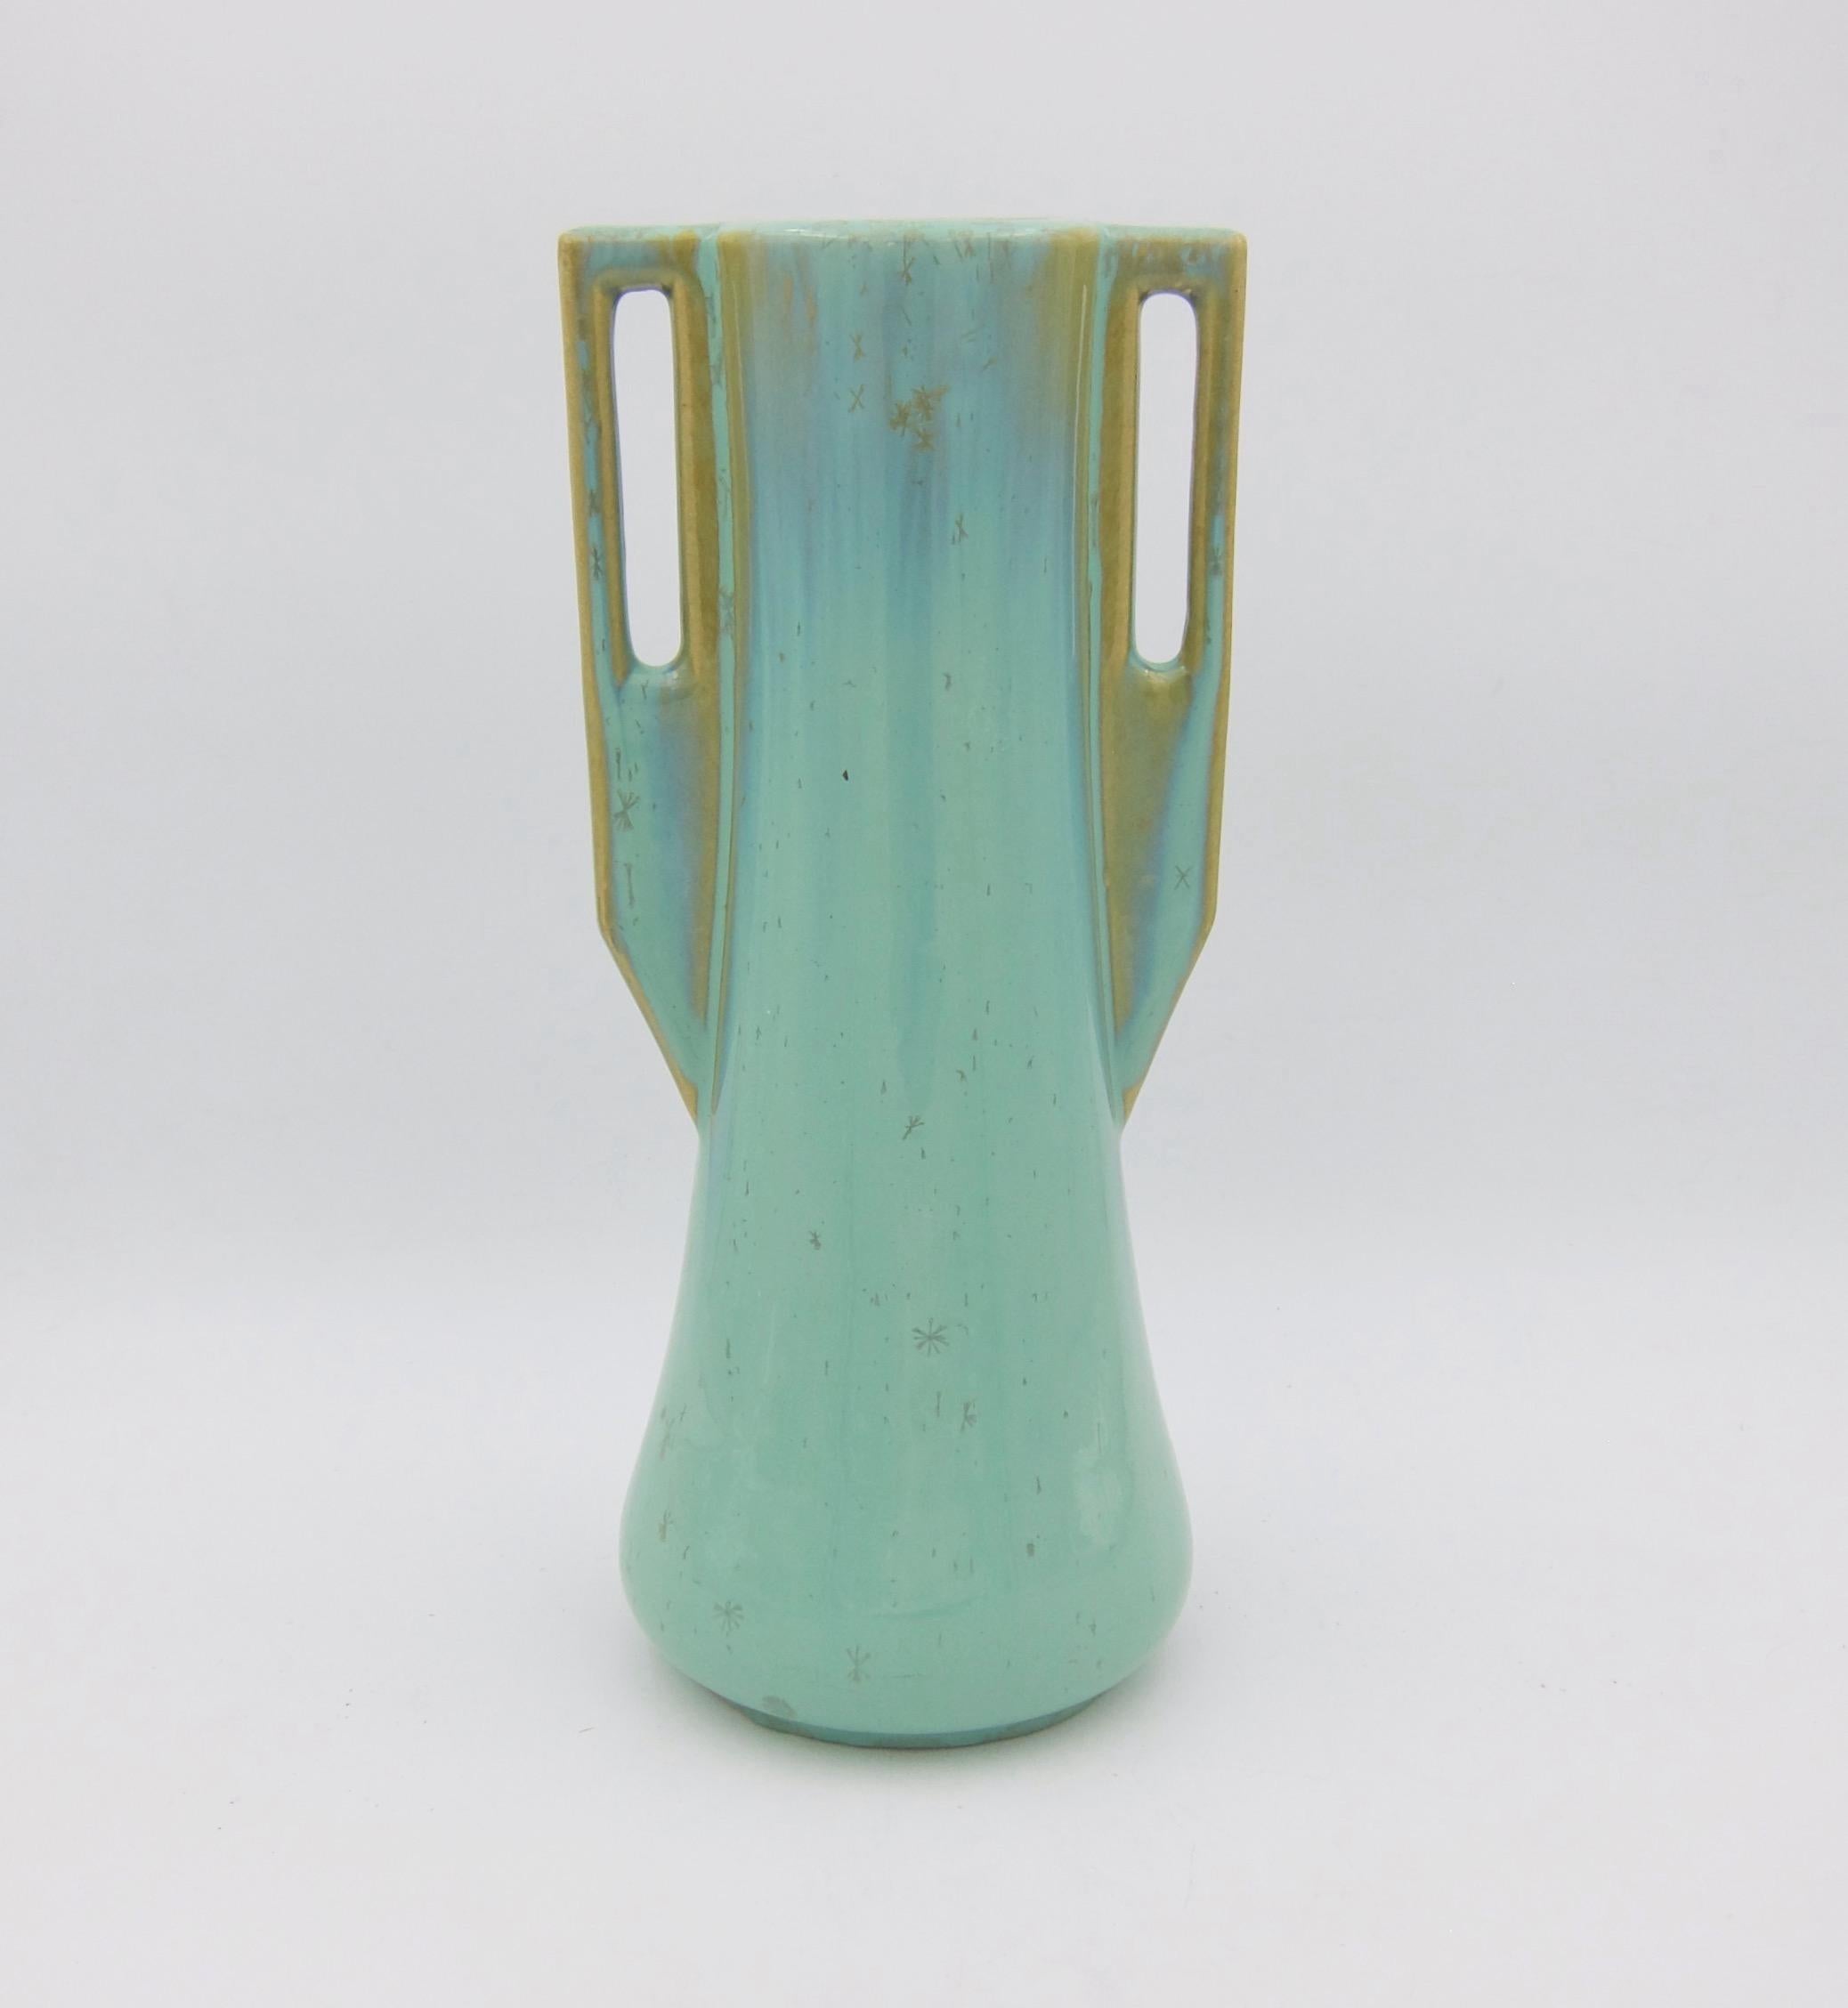 An early 20th century Arts & Crafts vase from Fulper Pottery of Flemington, New Jersey. This substantial piece of American art pottery is Fulper's form 27 featuring a tapering body and two squared buttressed handles. The vase is decorated with a